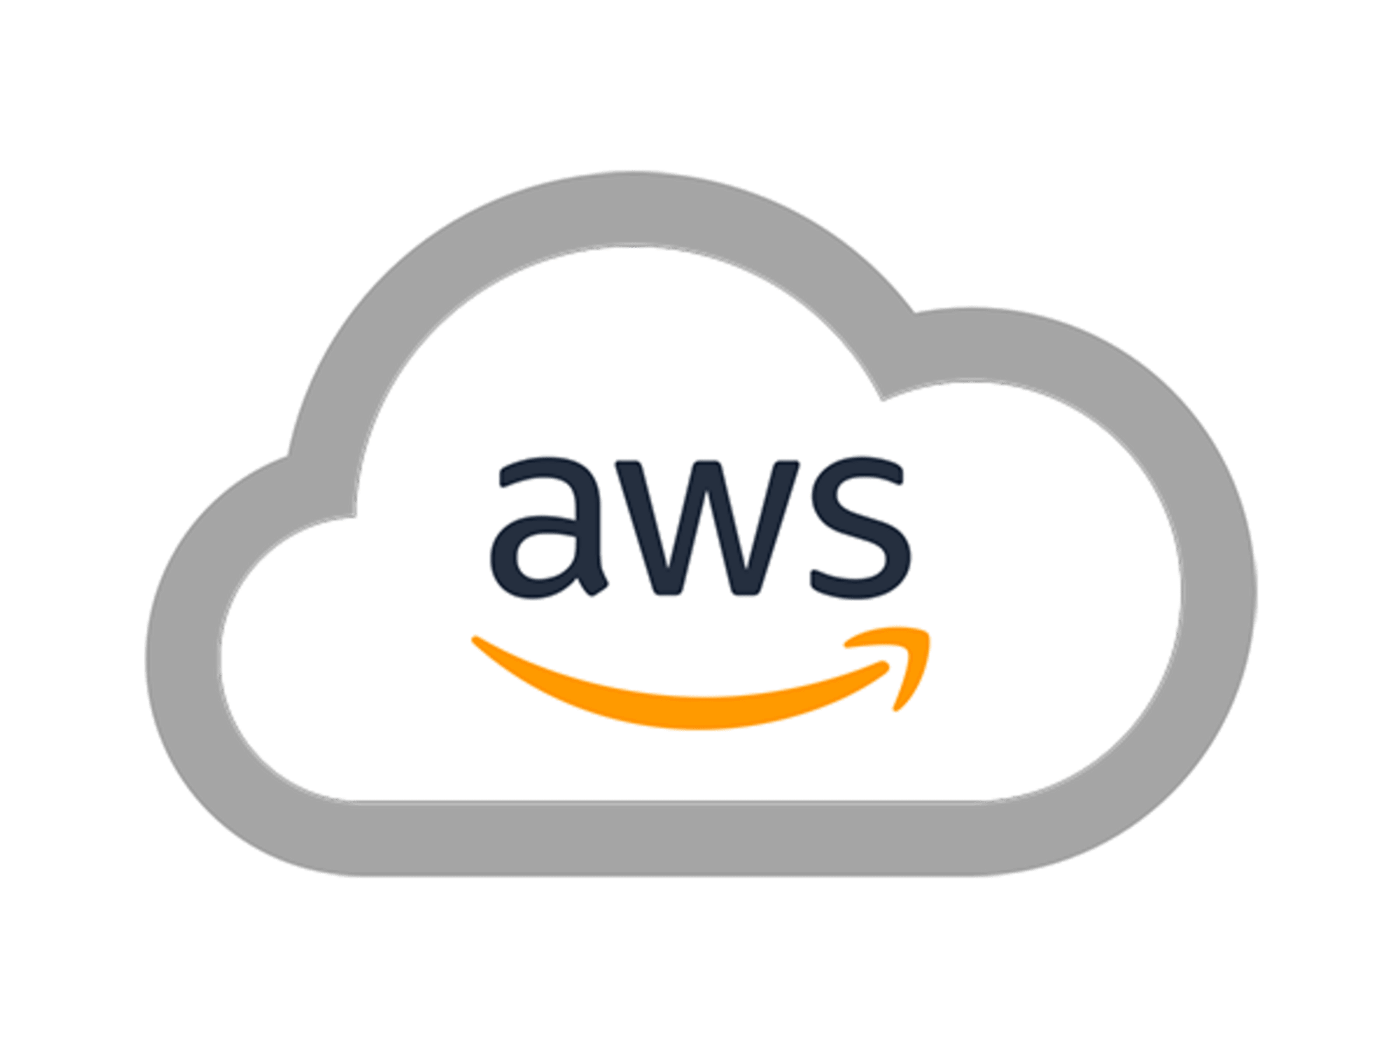 New Strategic Partnership Helps Hospitals Deploy Epic EHR to AWS Cloud